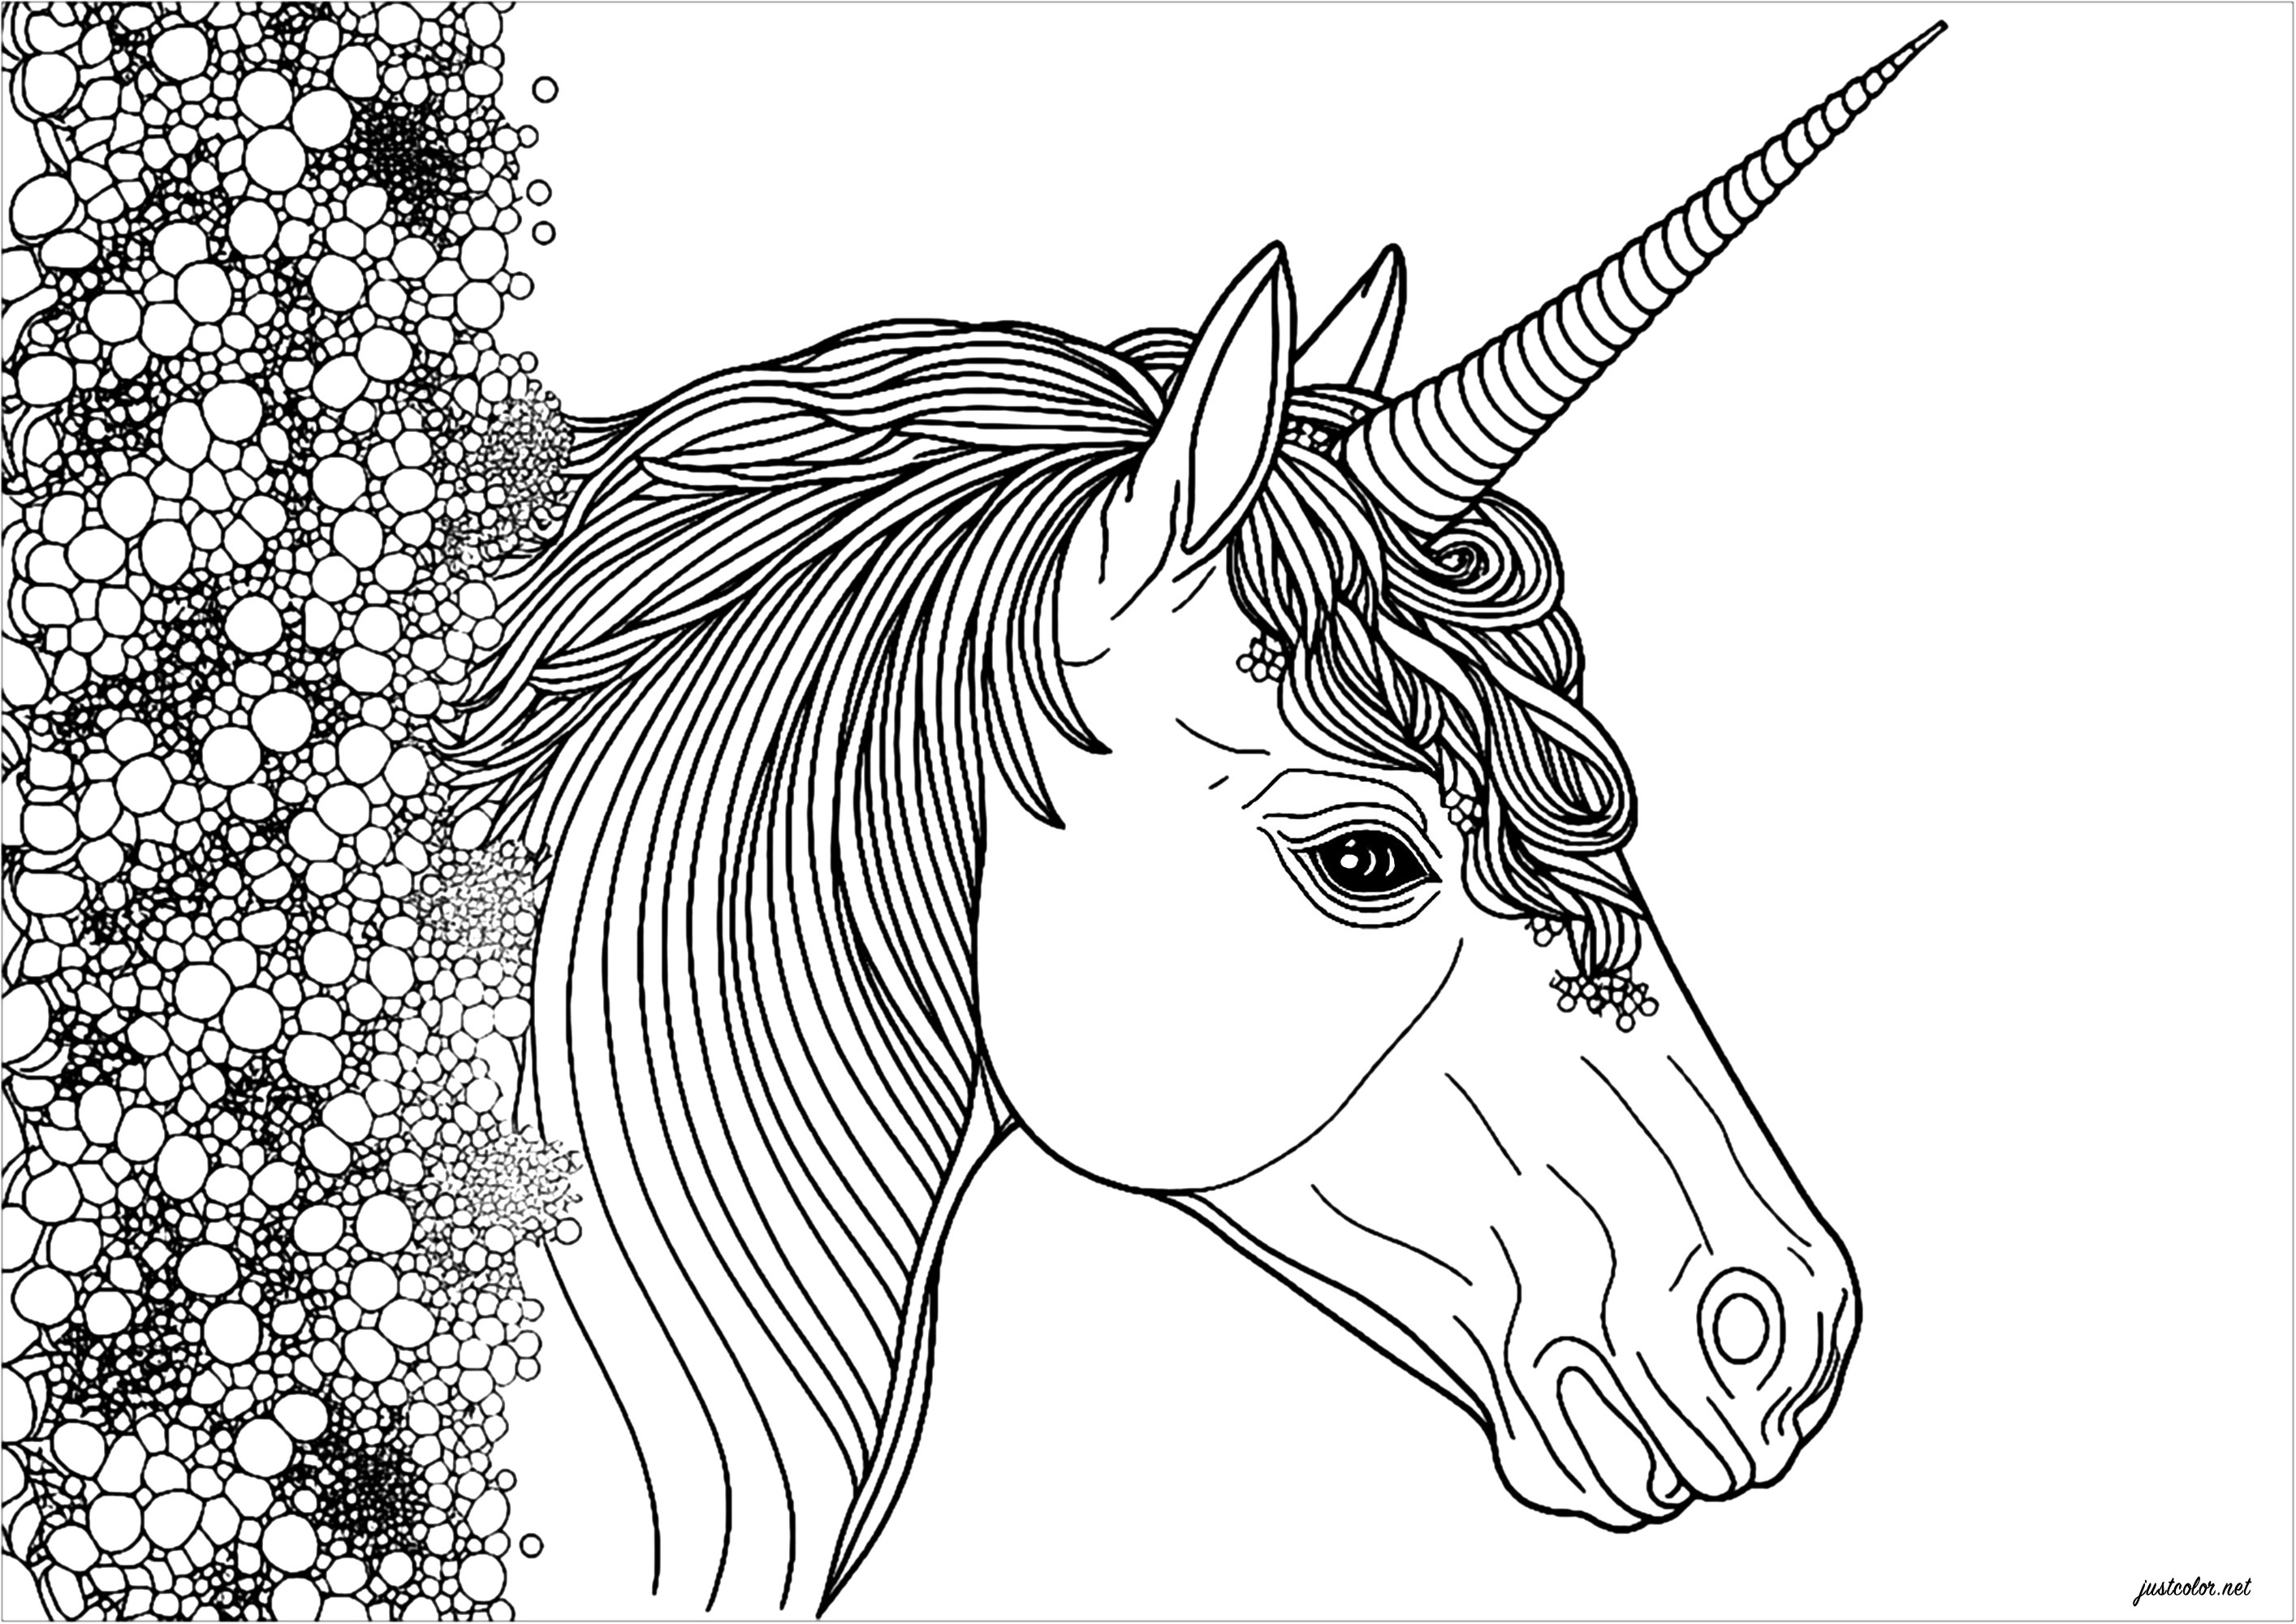 Cute realistic unicorn in profile view. This unicorn seems to come out of an avalanche of diamonds